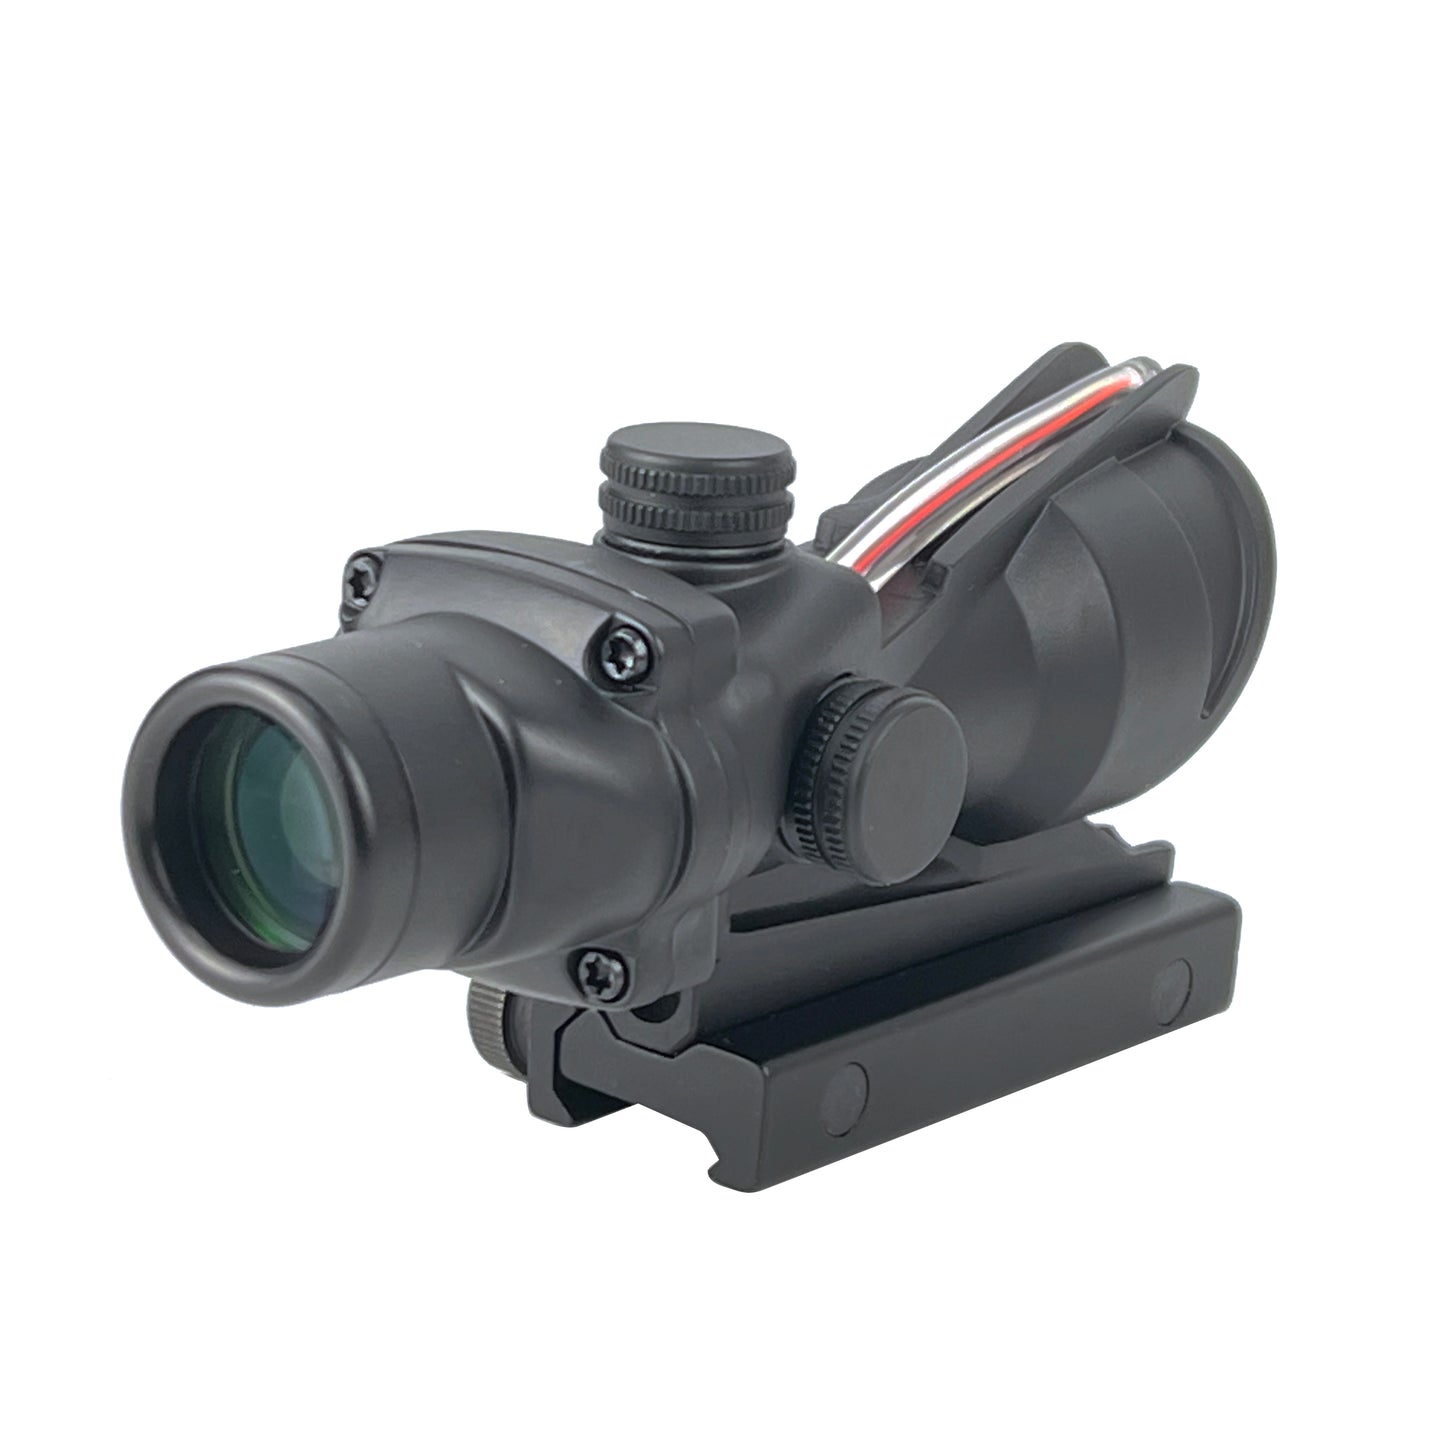 4x32C1A Power Optics Hunting Scope Optical Red Dot Sight From Caliber .223/5.56